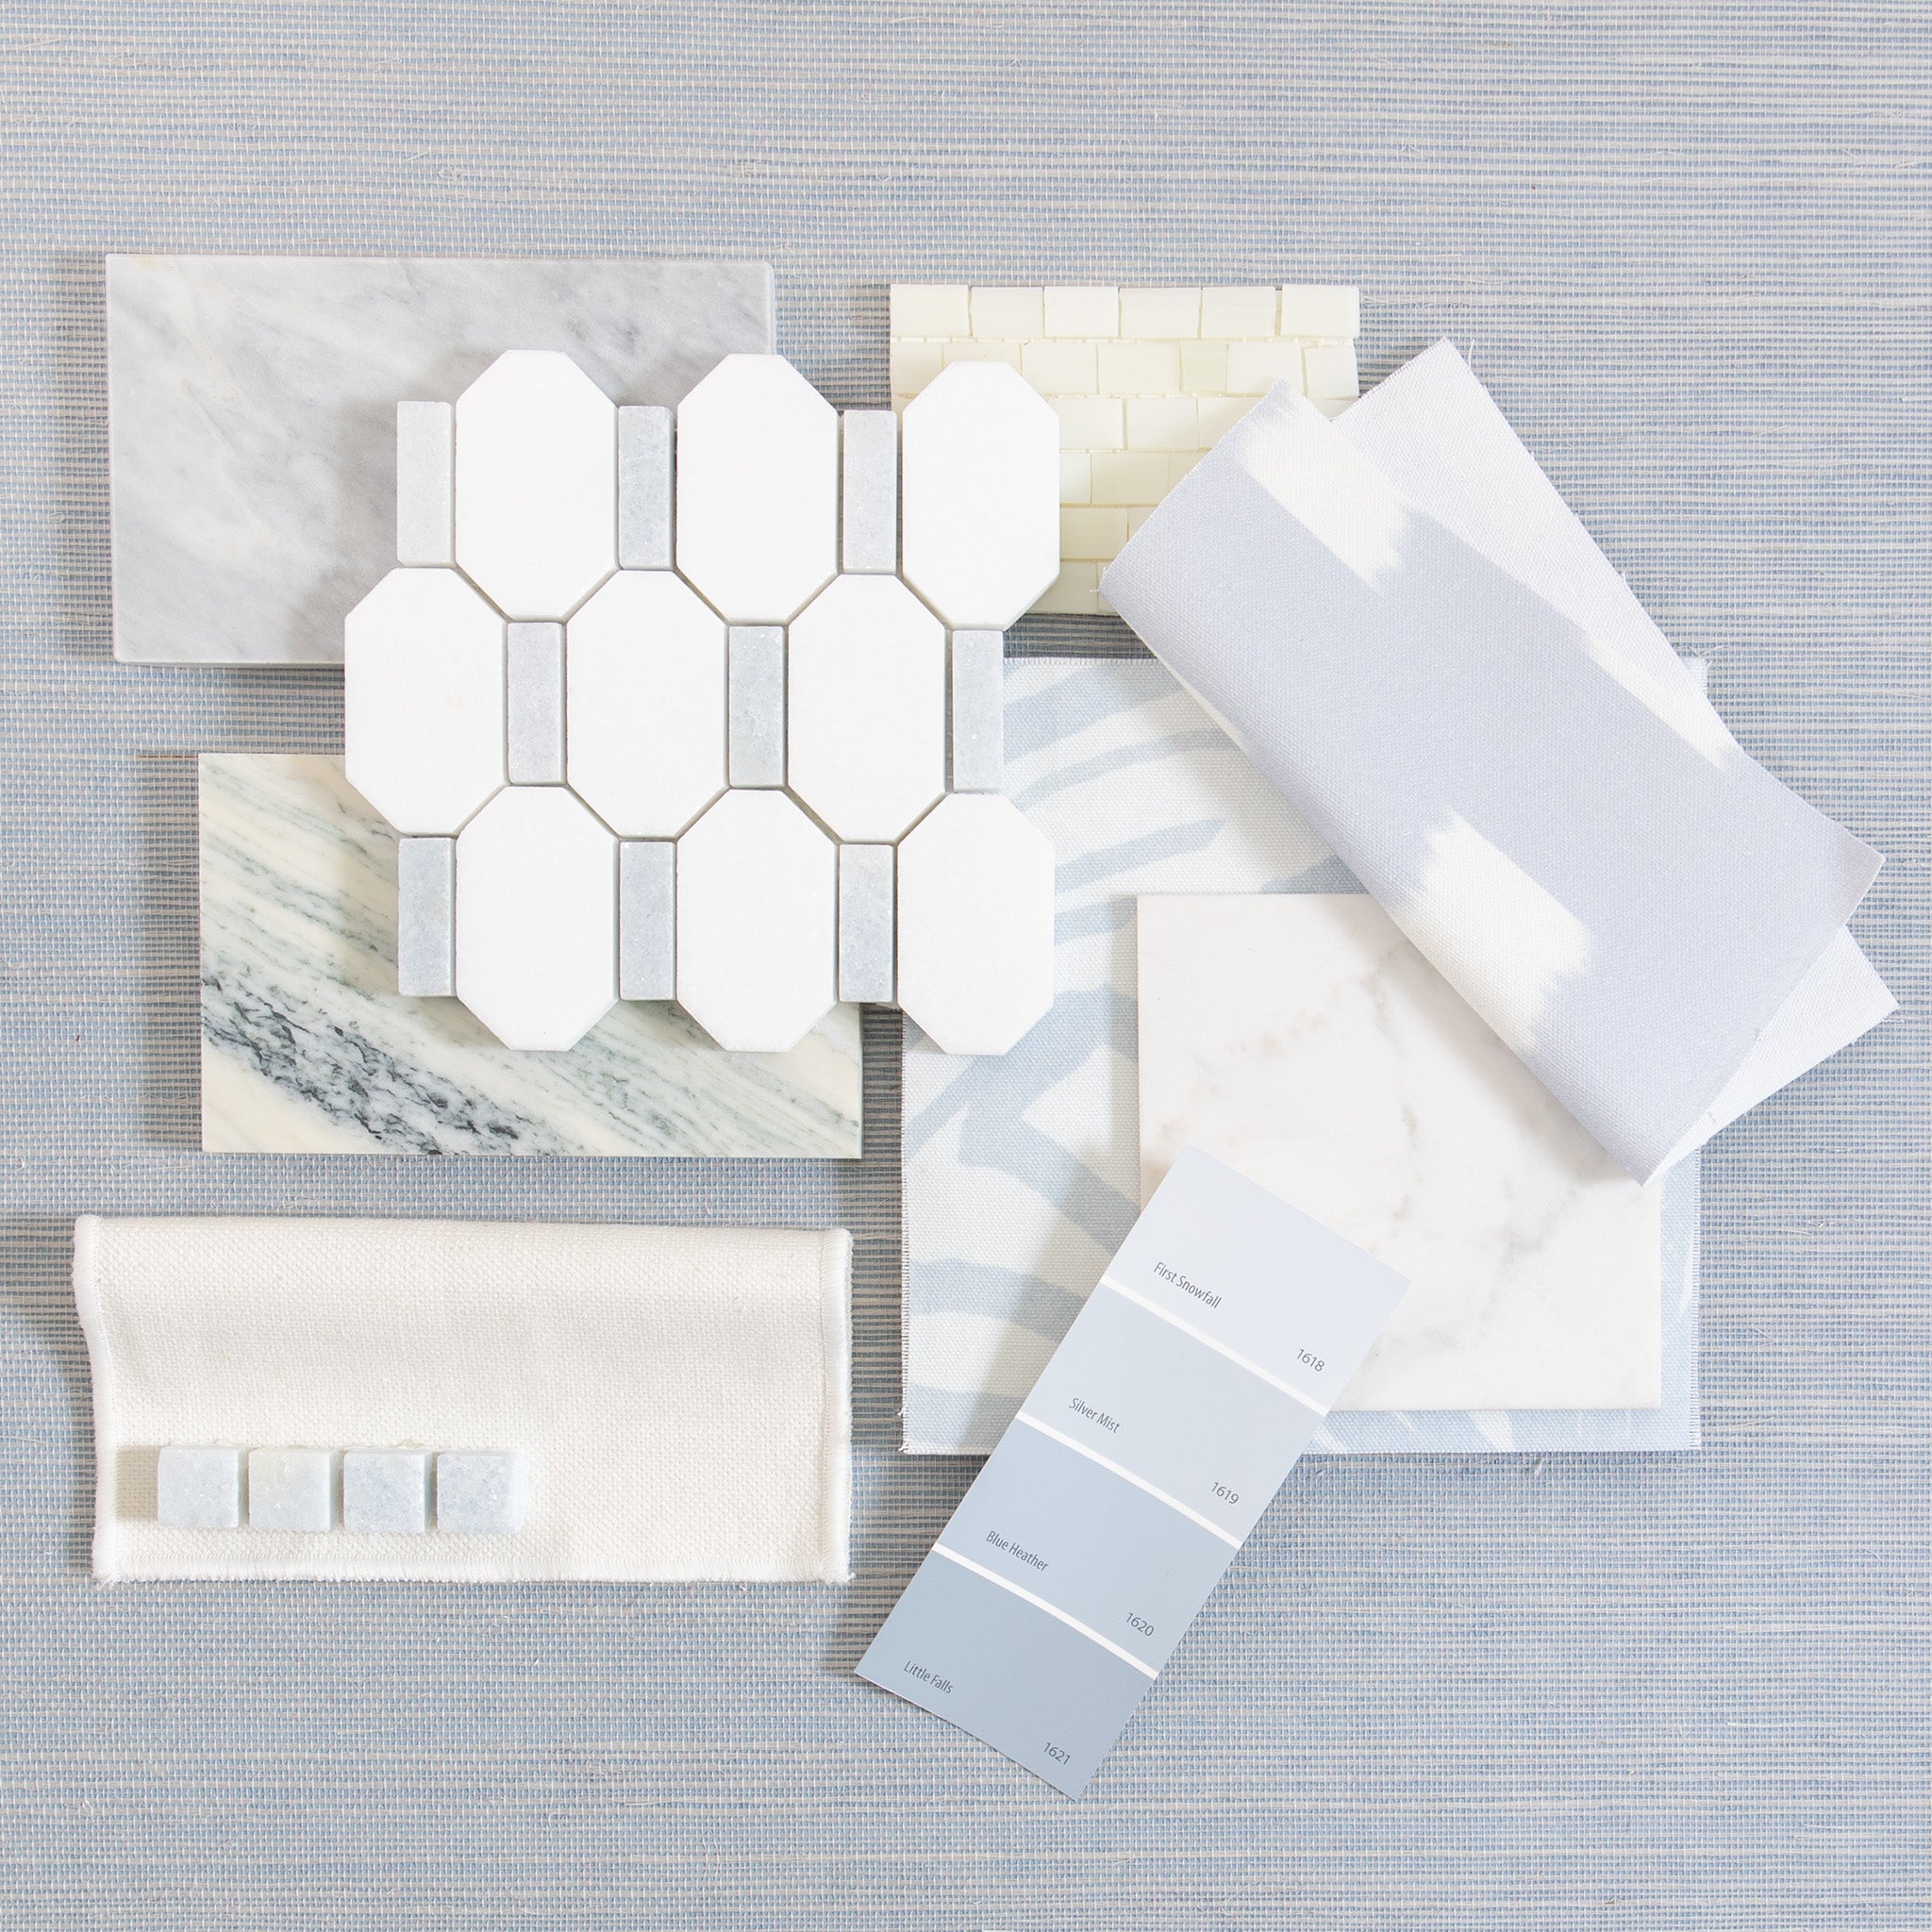 Interior design moodboard and wallpaper inspirations with blue paint and blue and gray tile on top